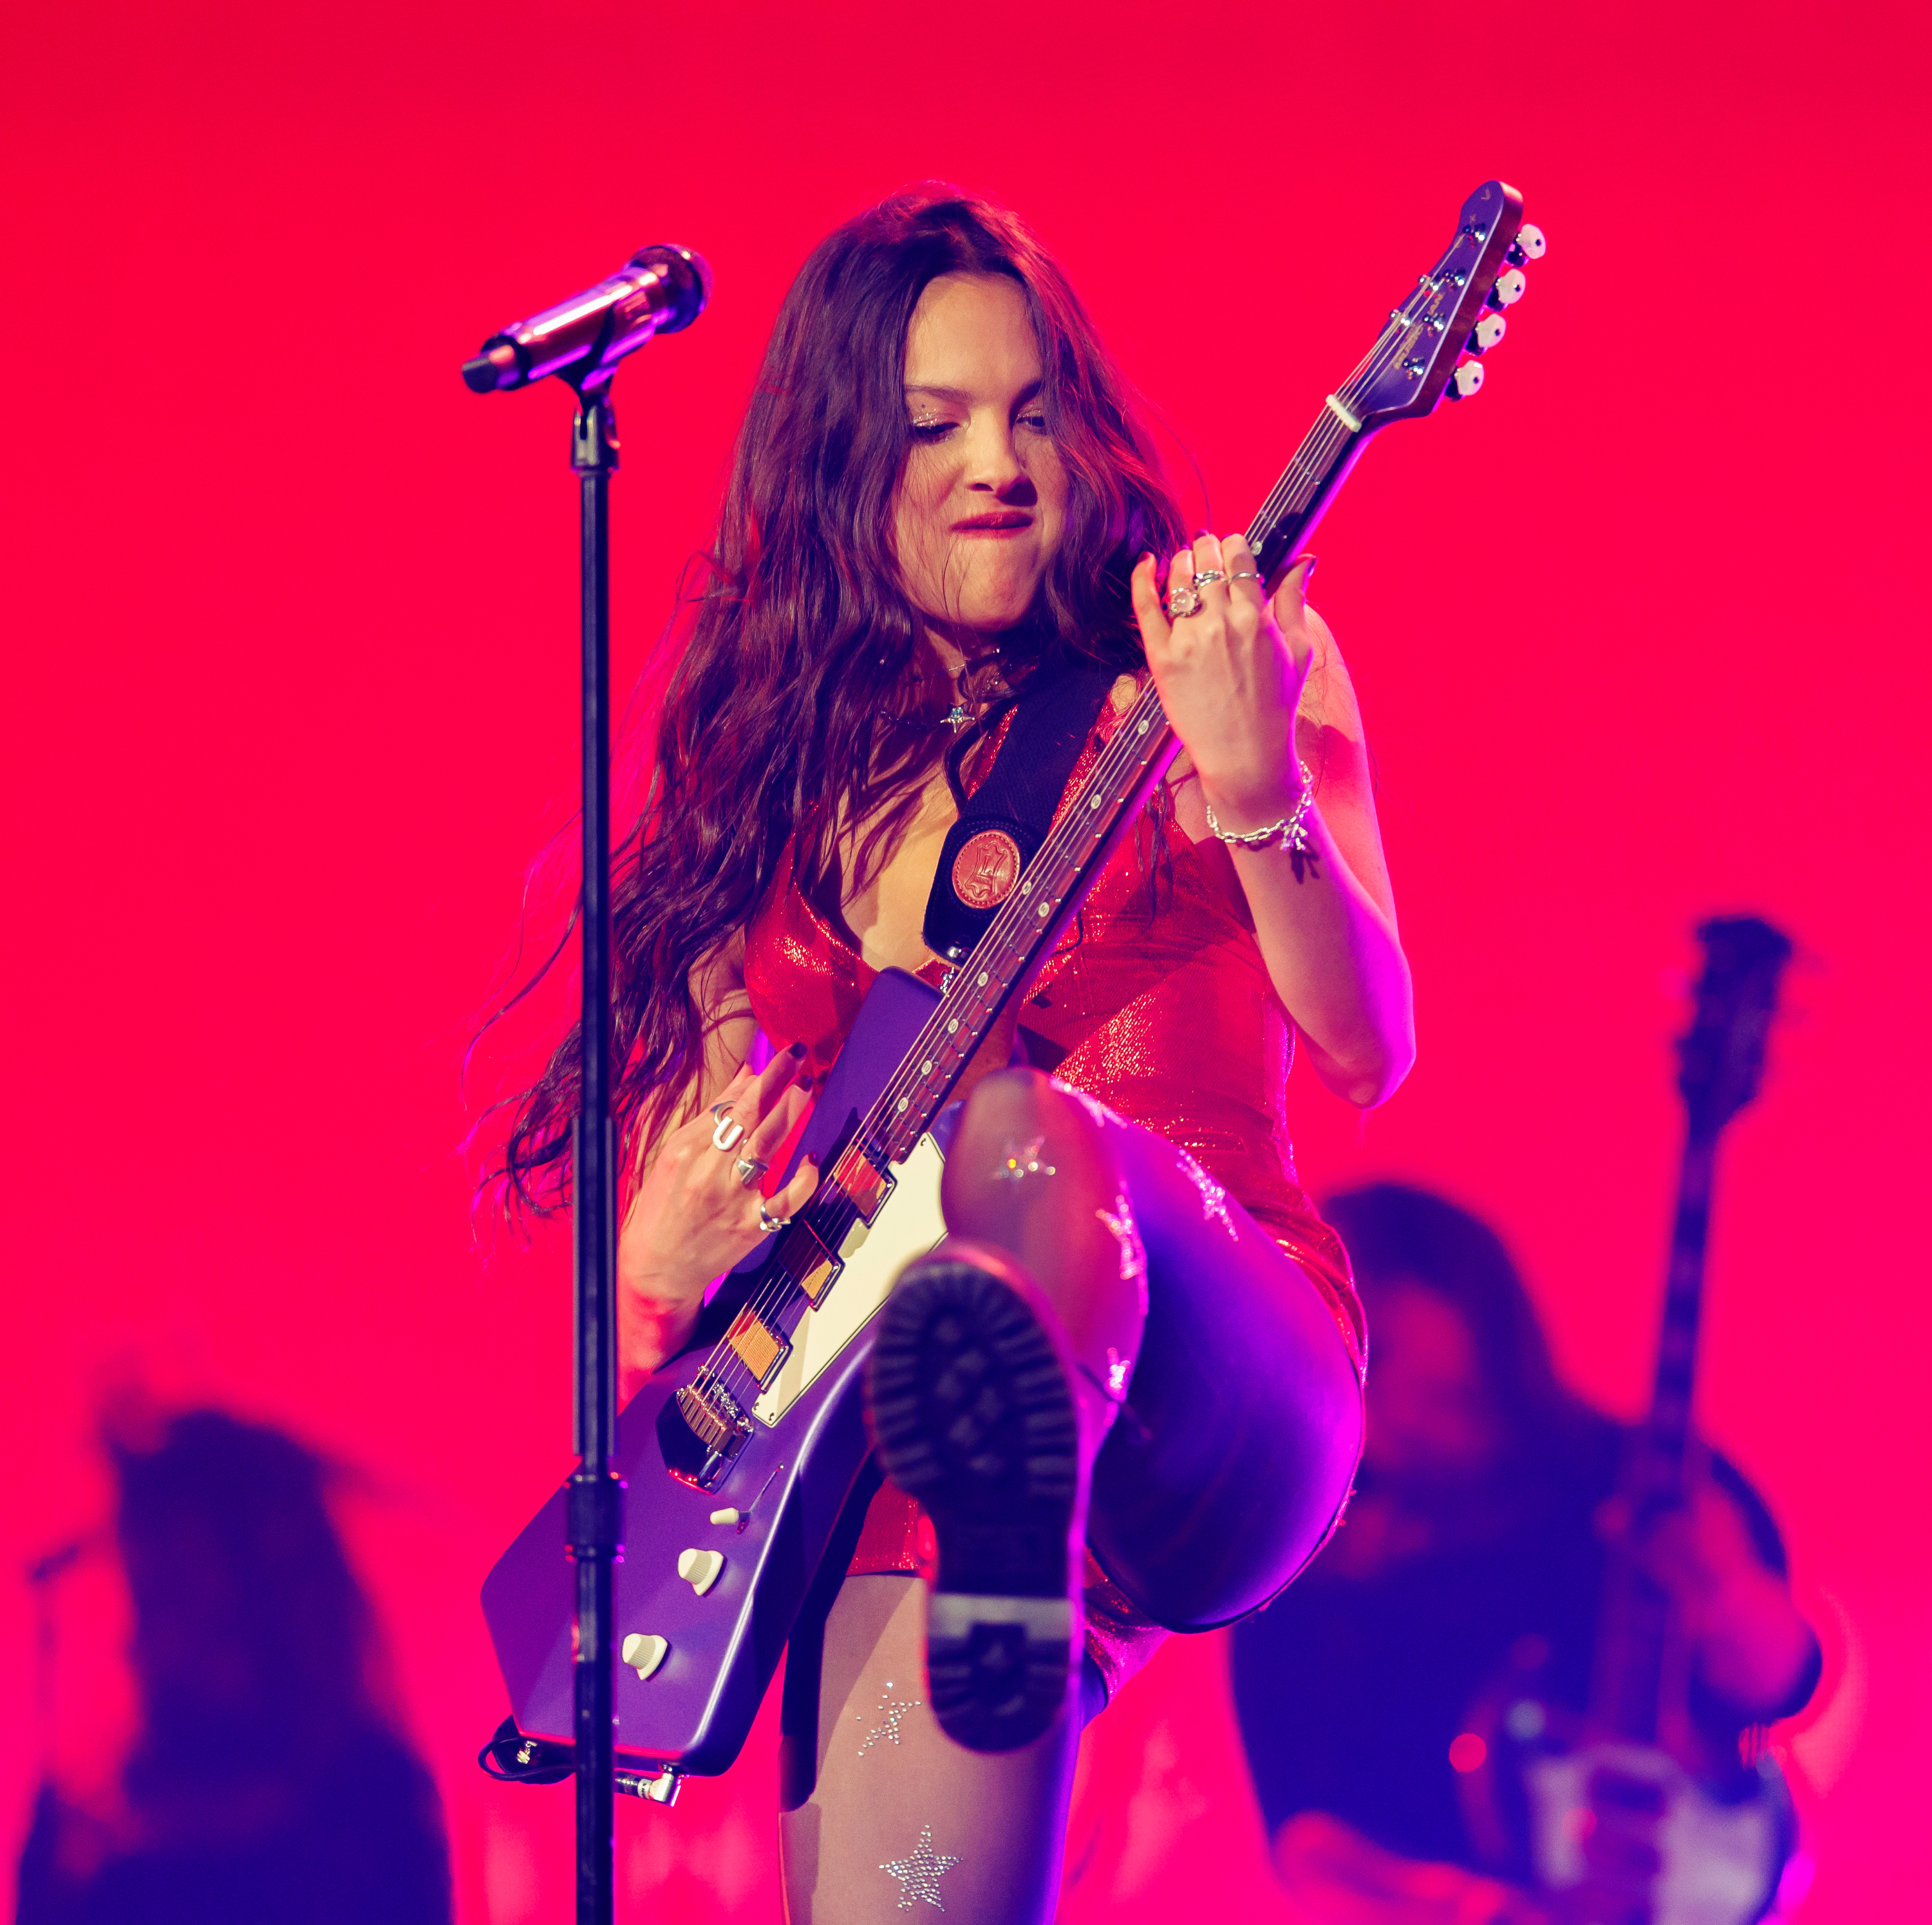 Olivia performing on stage with a guitar, wearing a performance outfit